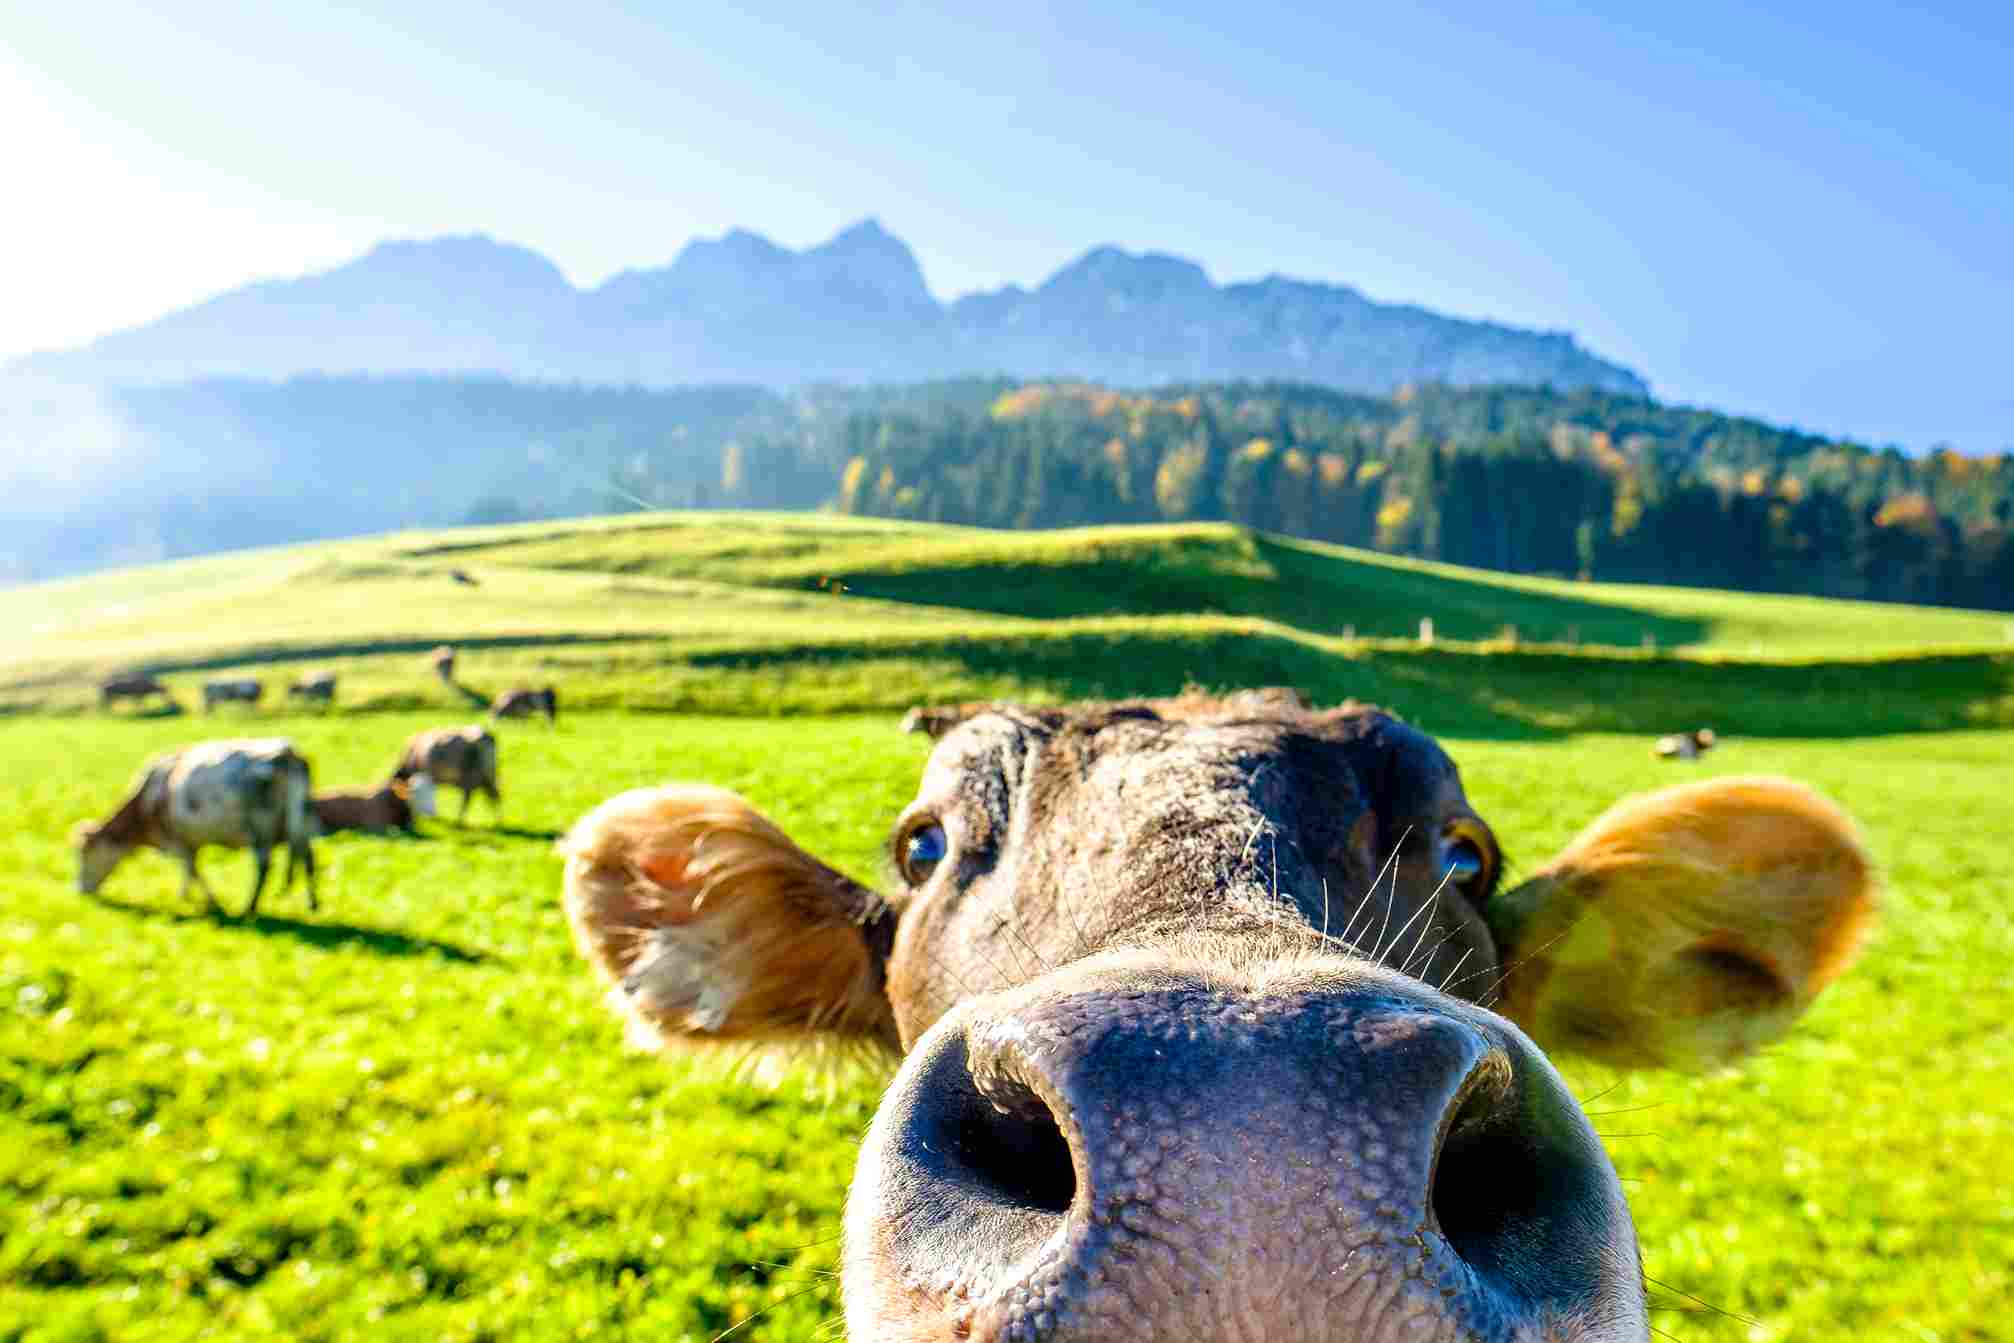 Cow peeking at the camera with his nose large at the front of the image with a green pasture background.